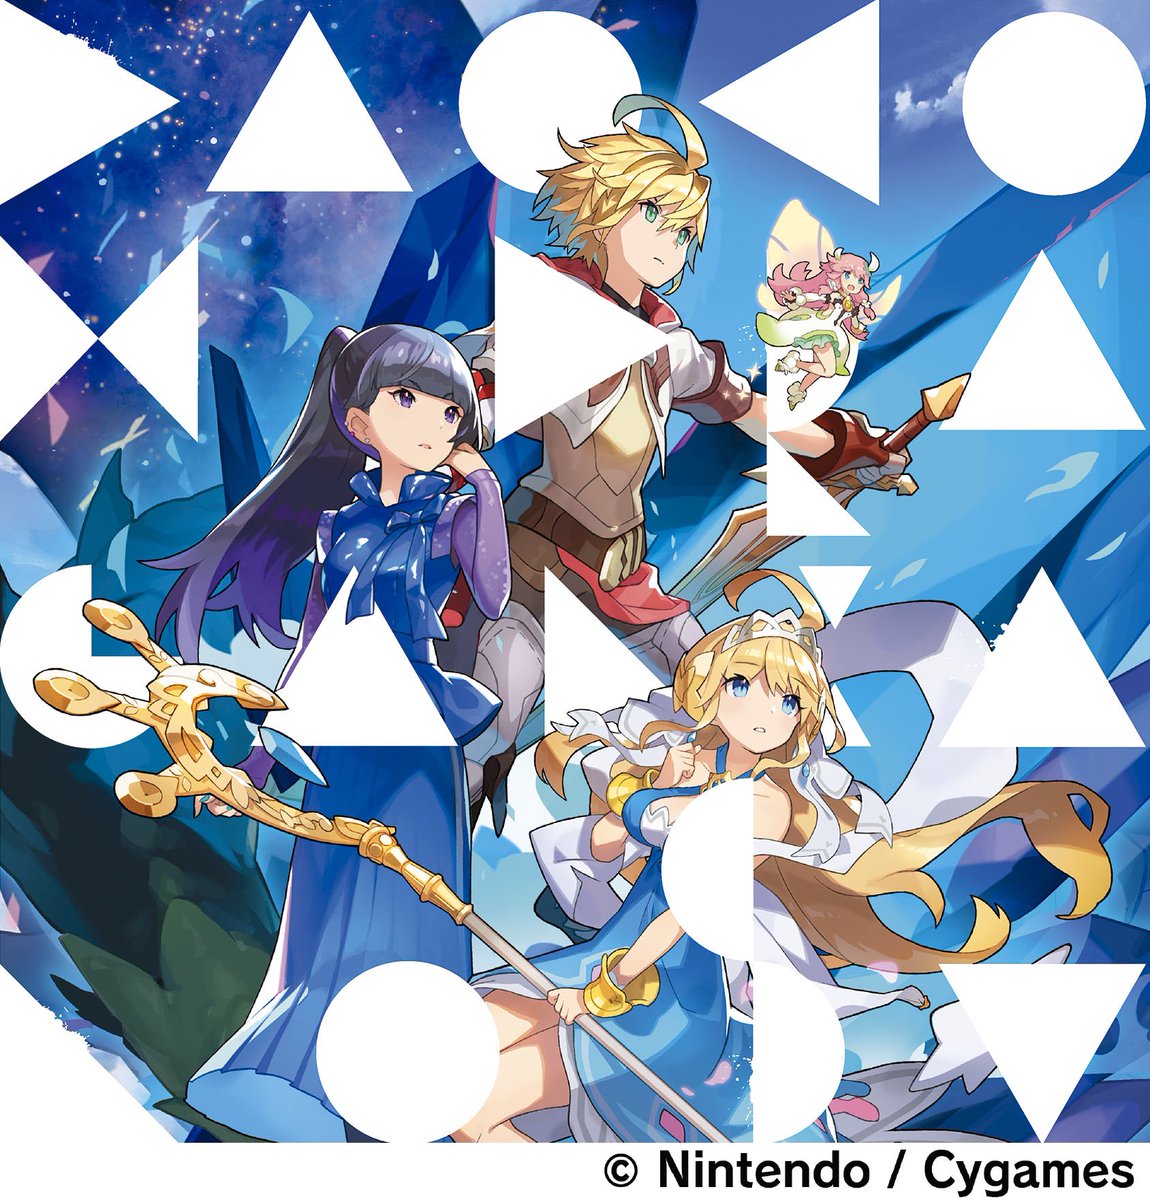 Cover art for『DAOKO × Scha Dara Parr - ファイアーエムブレムメインテーマ (Ver. Heroes)』from the release『DAOKO x Dragalia Lost